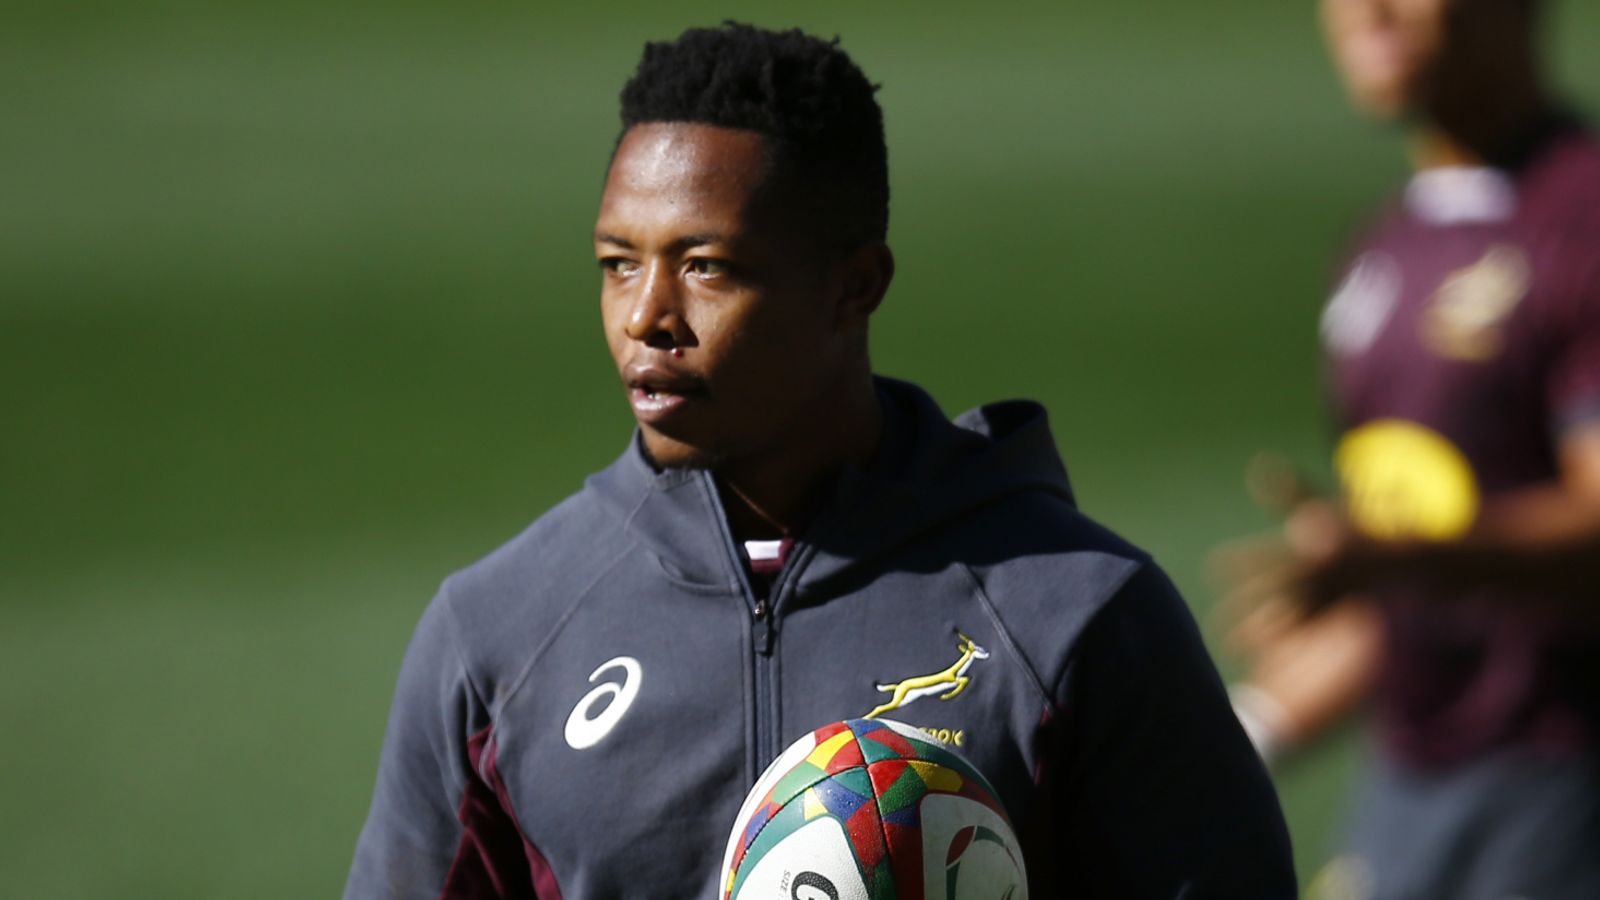 Sbu Nkosi: South Africa winger reported missing after no contact for three weeks